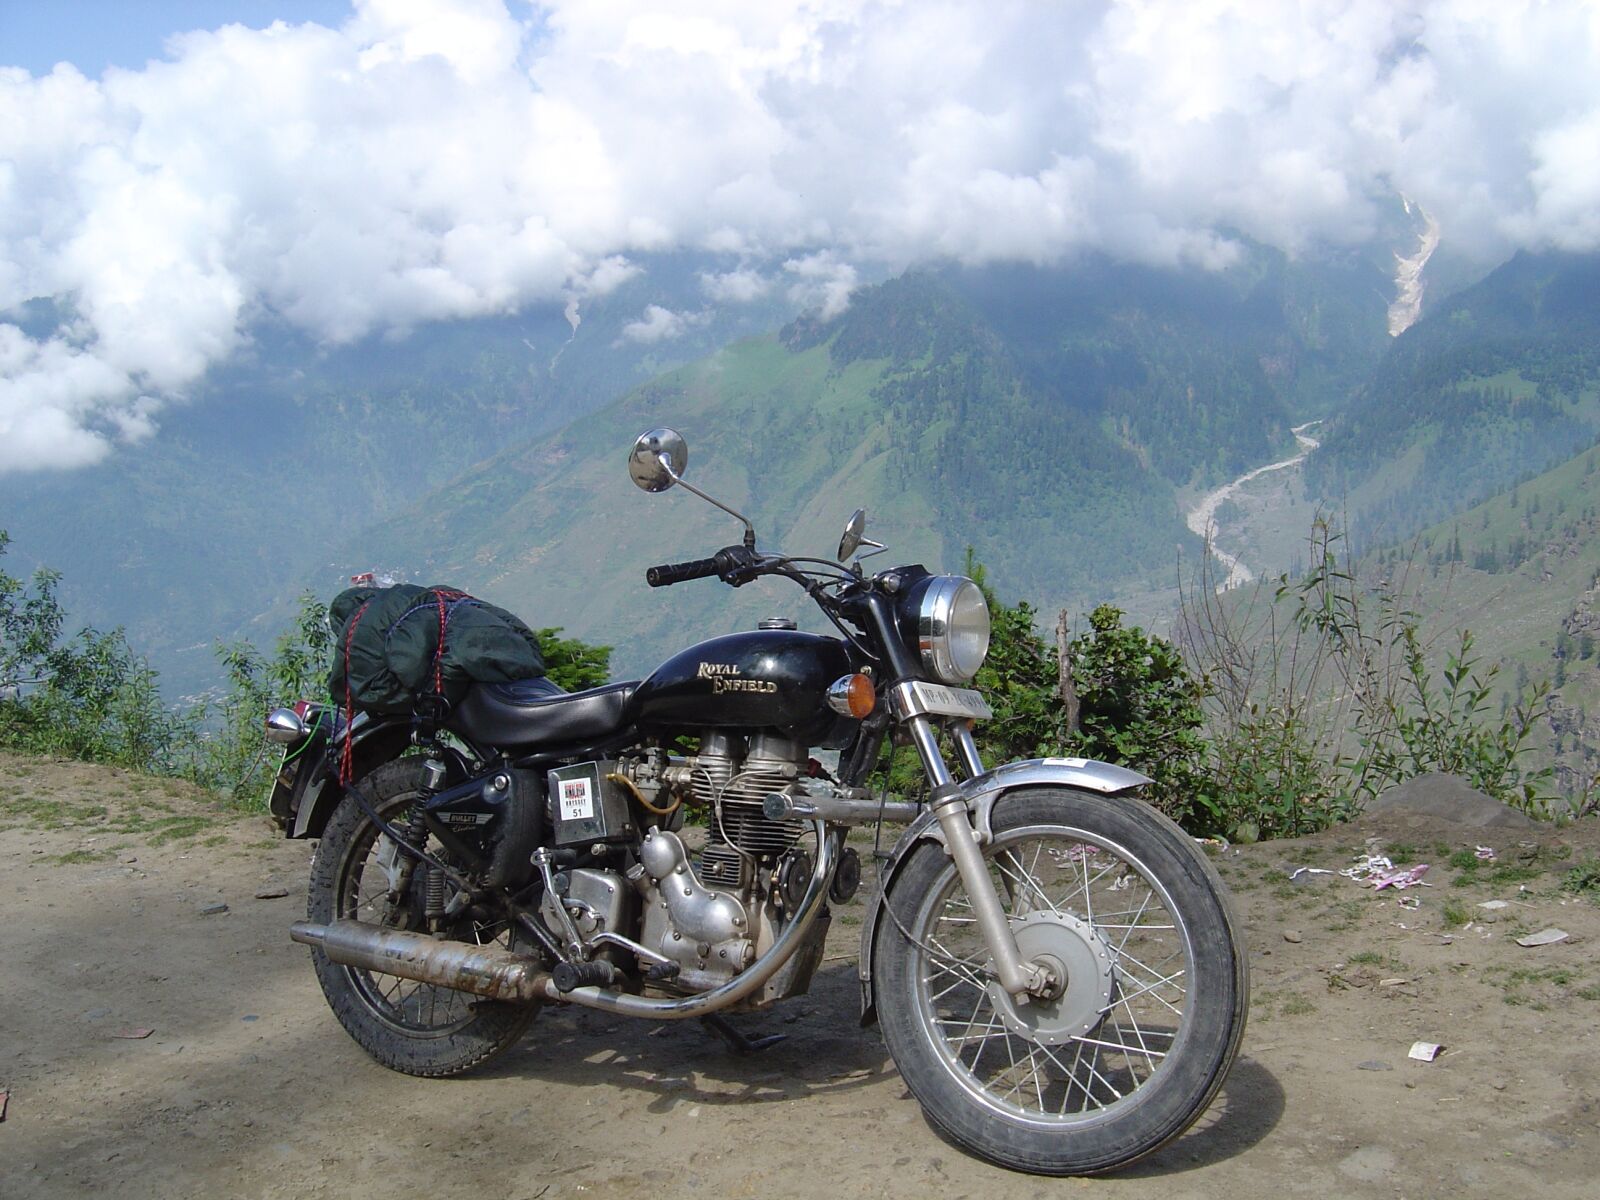 Sony DSC-P92 sample photo. Pilgrimage on royal enfield photography